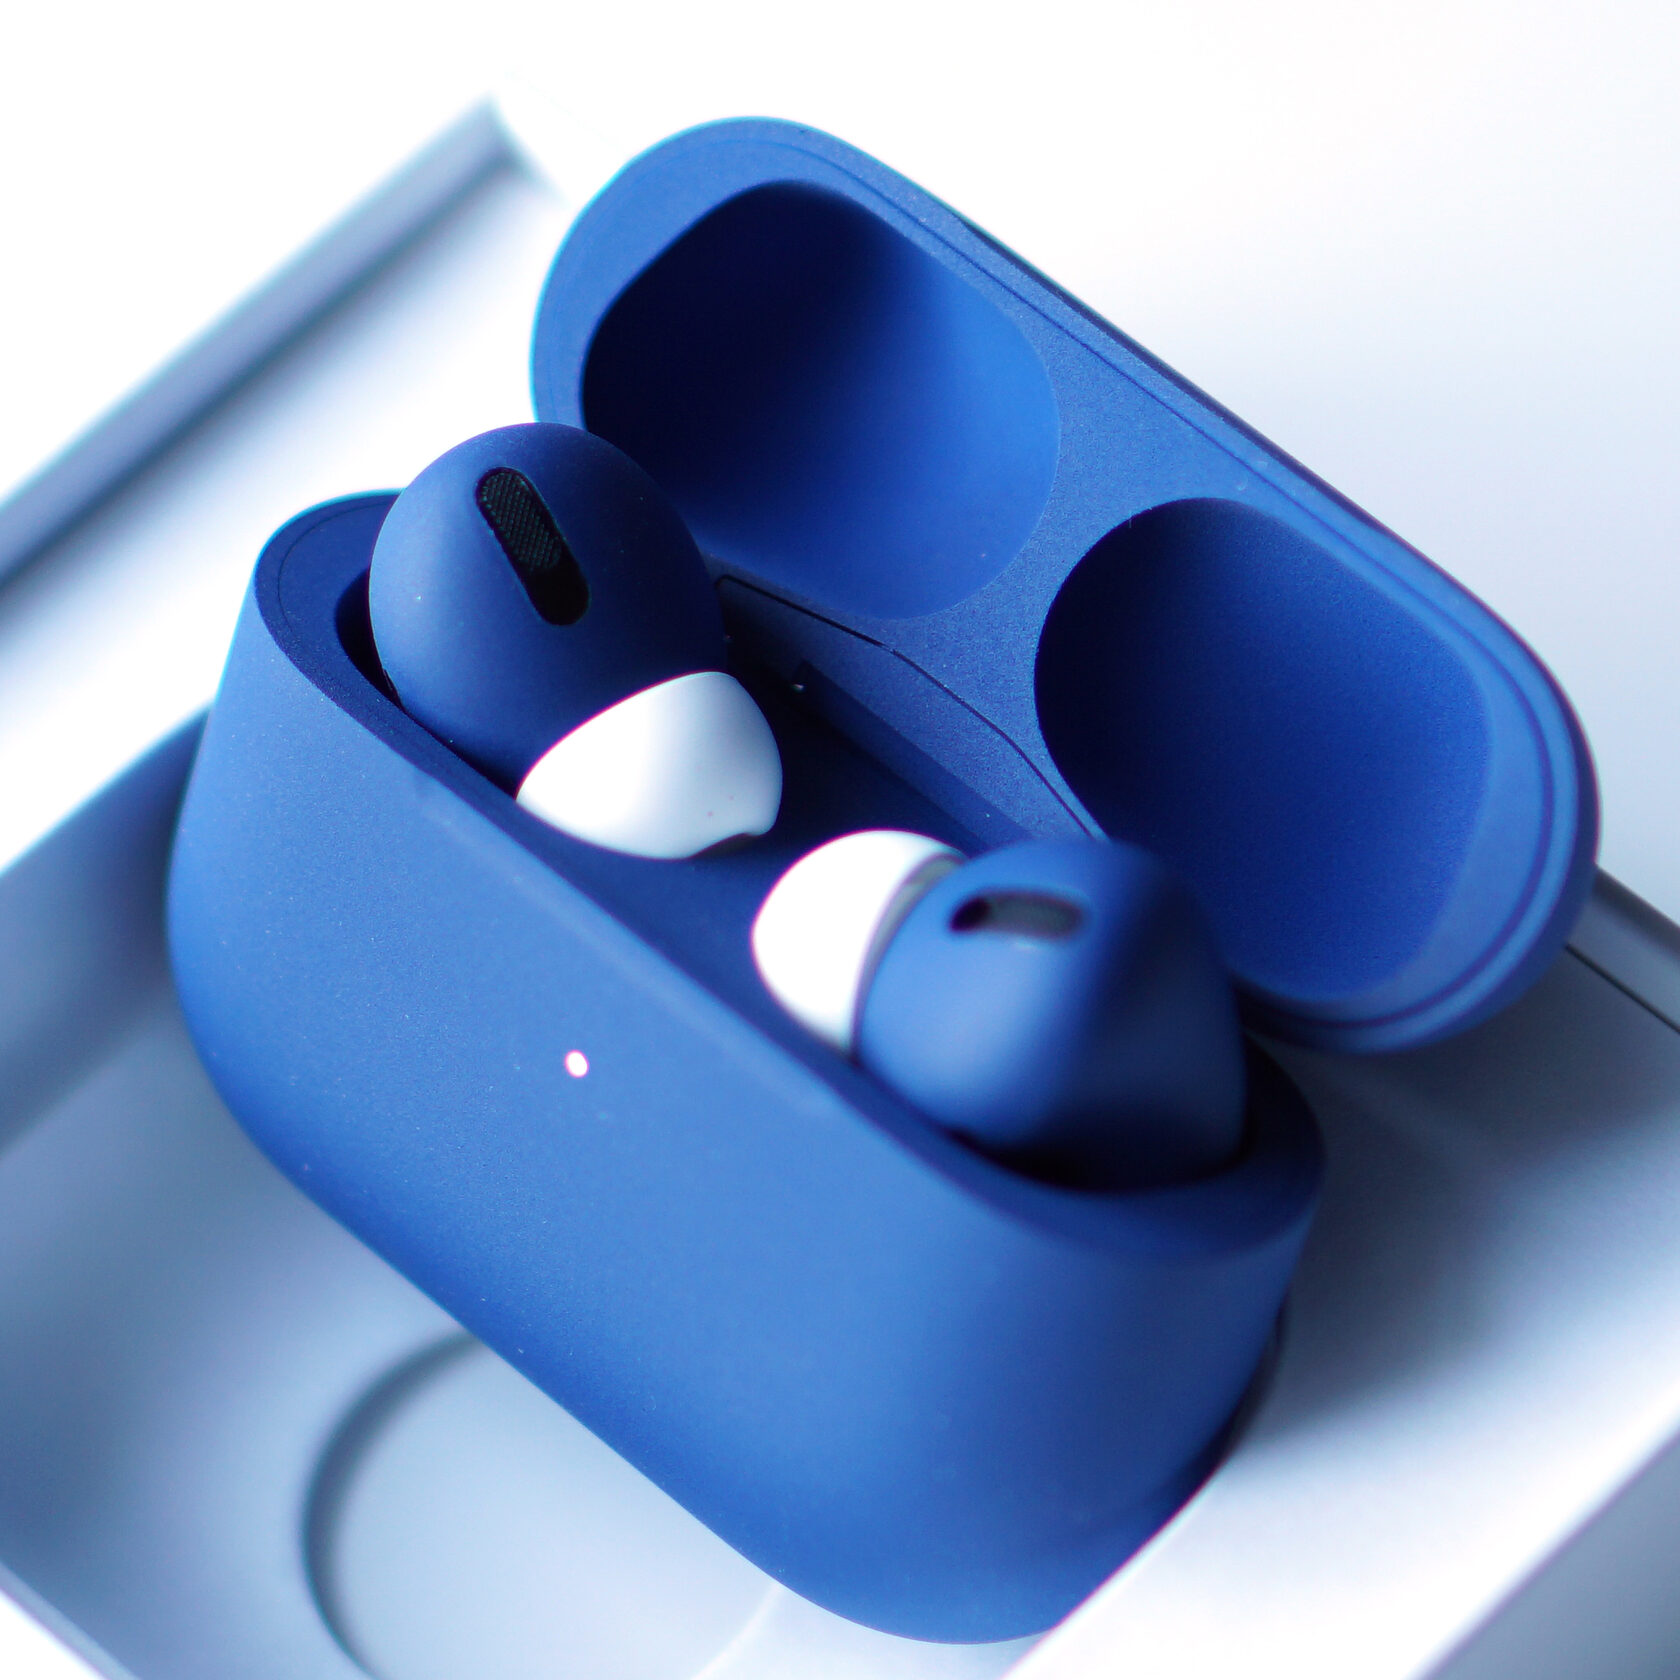 Airpods года выпуска. AIRPODS Pro 2. Аирподсы 3. AIRPODS Pro 3. AIRPODS Pro 2 Blue.